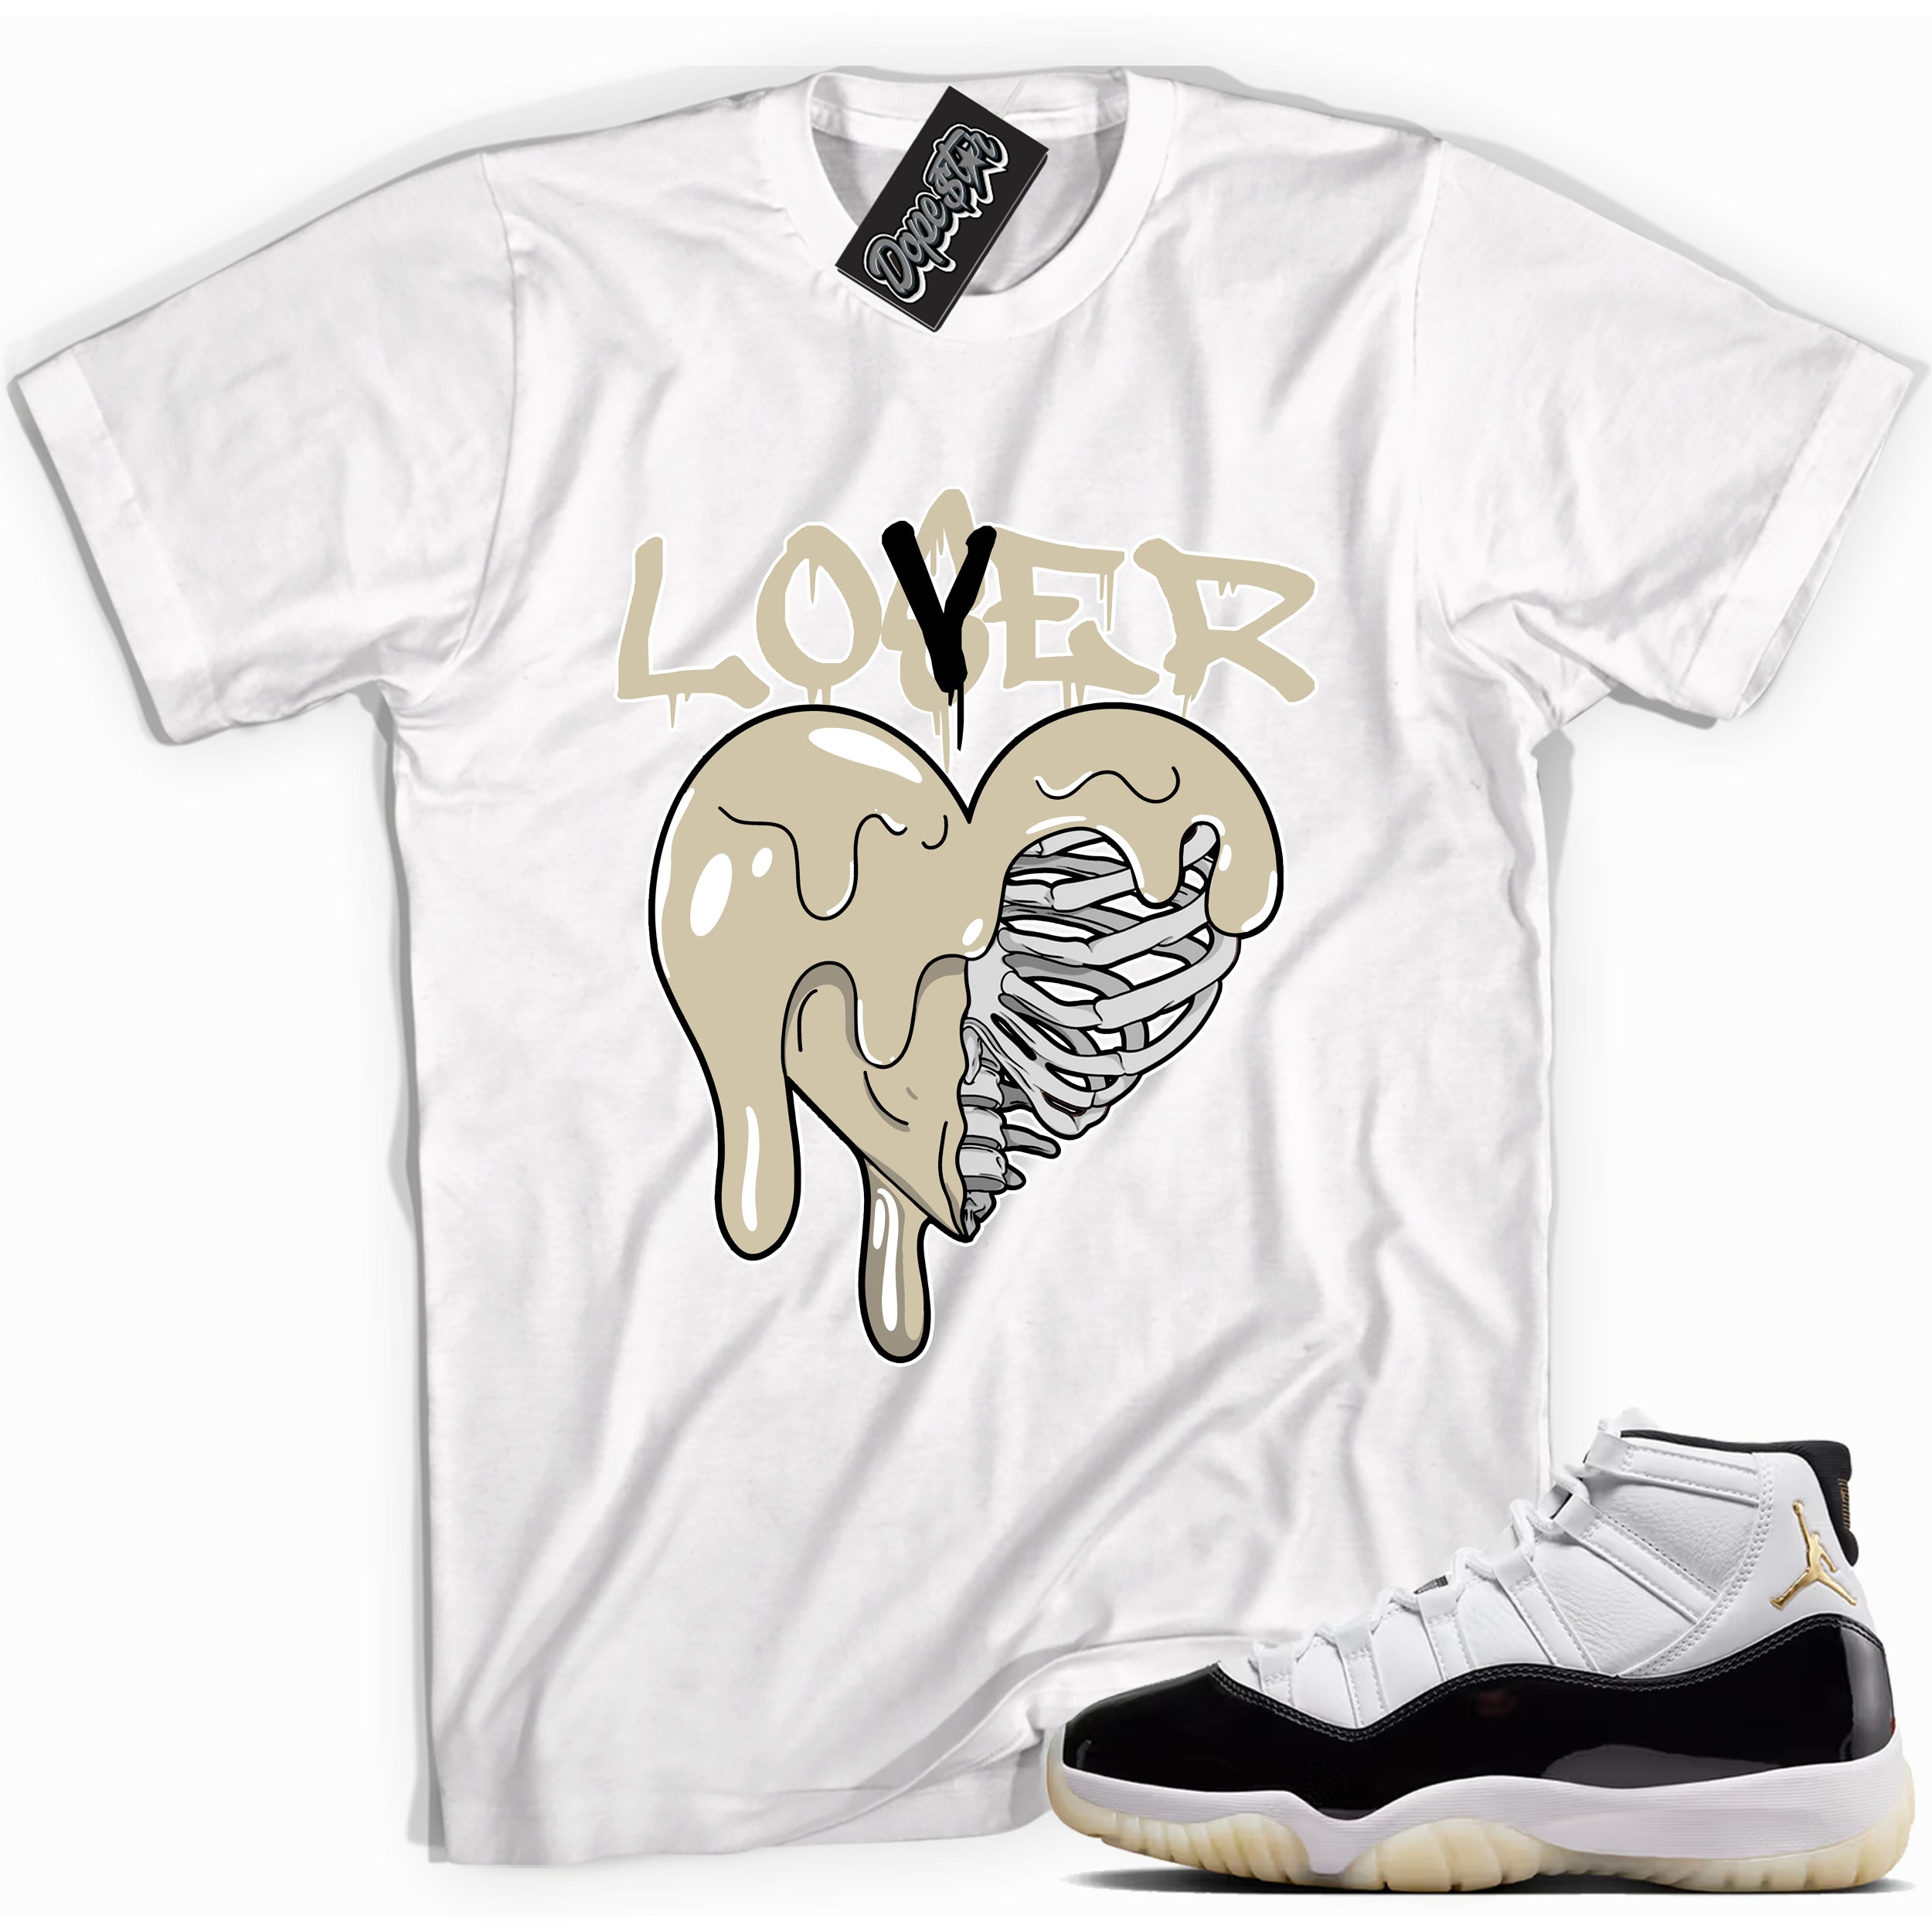 Cool White graphic tee with “ Lover Loser ” print, that perfectly matches AIR JORDAN 11 GRATITUDE   sneakers 